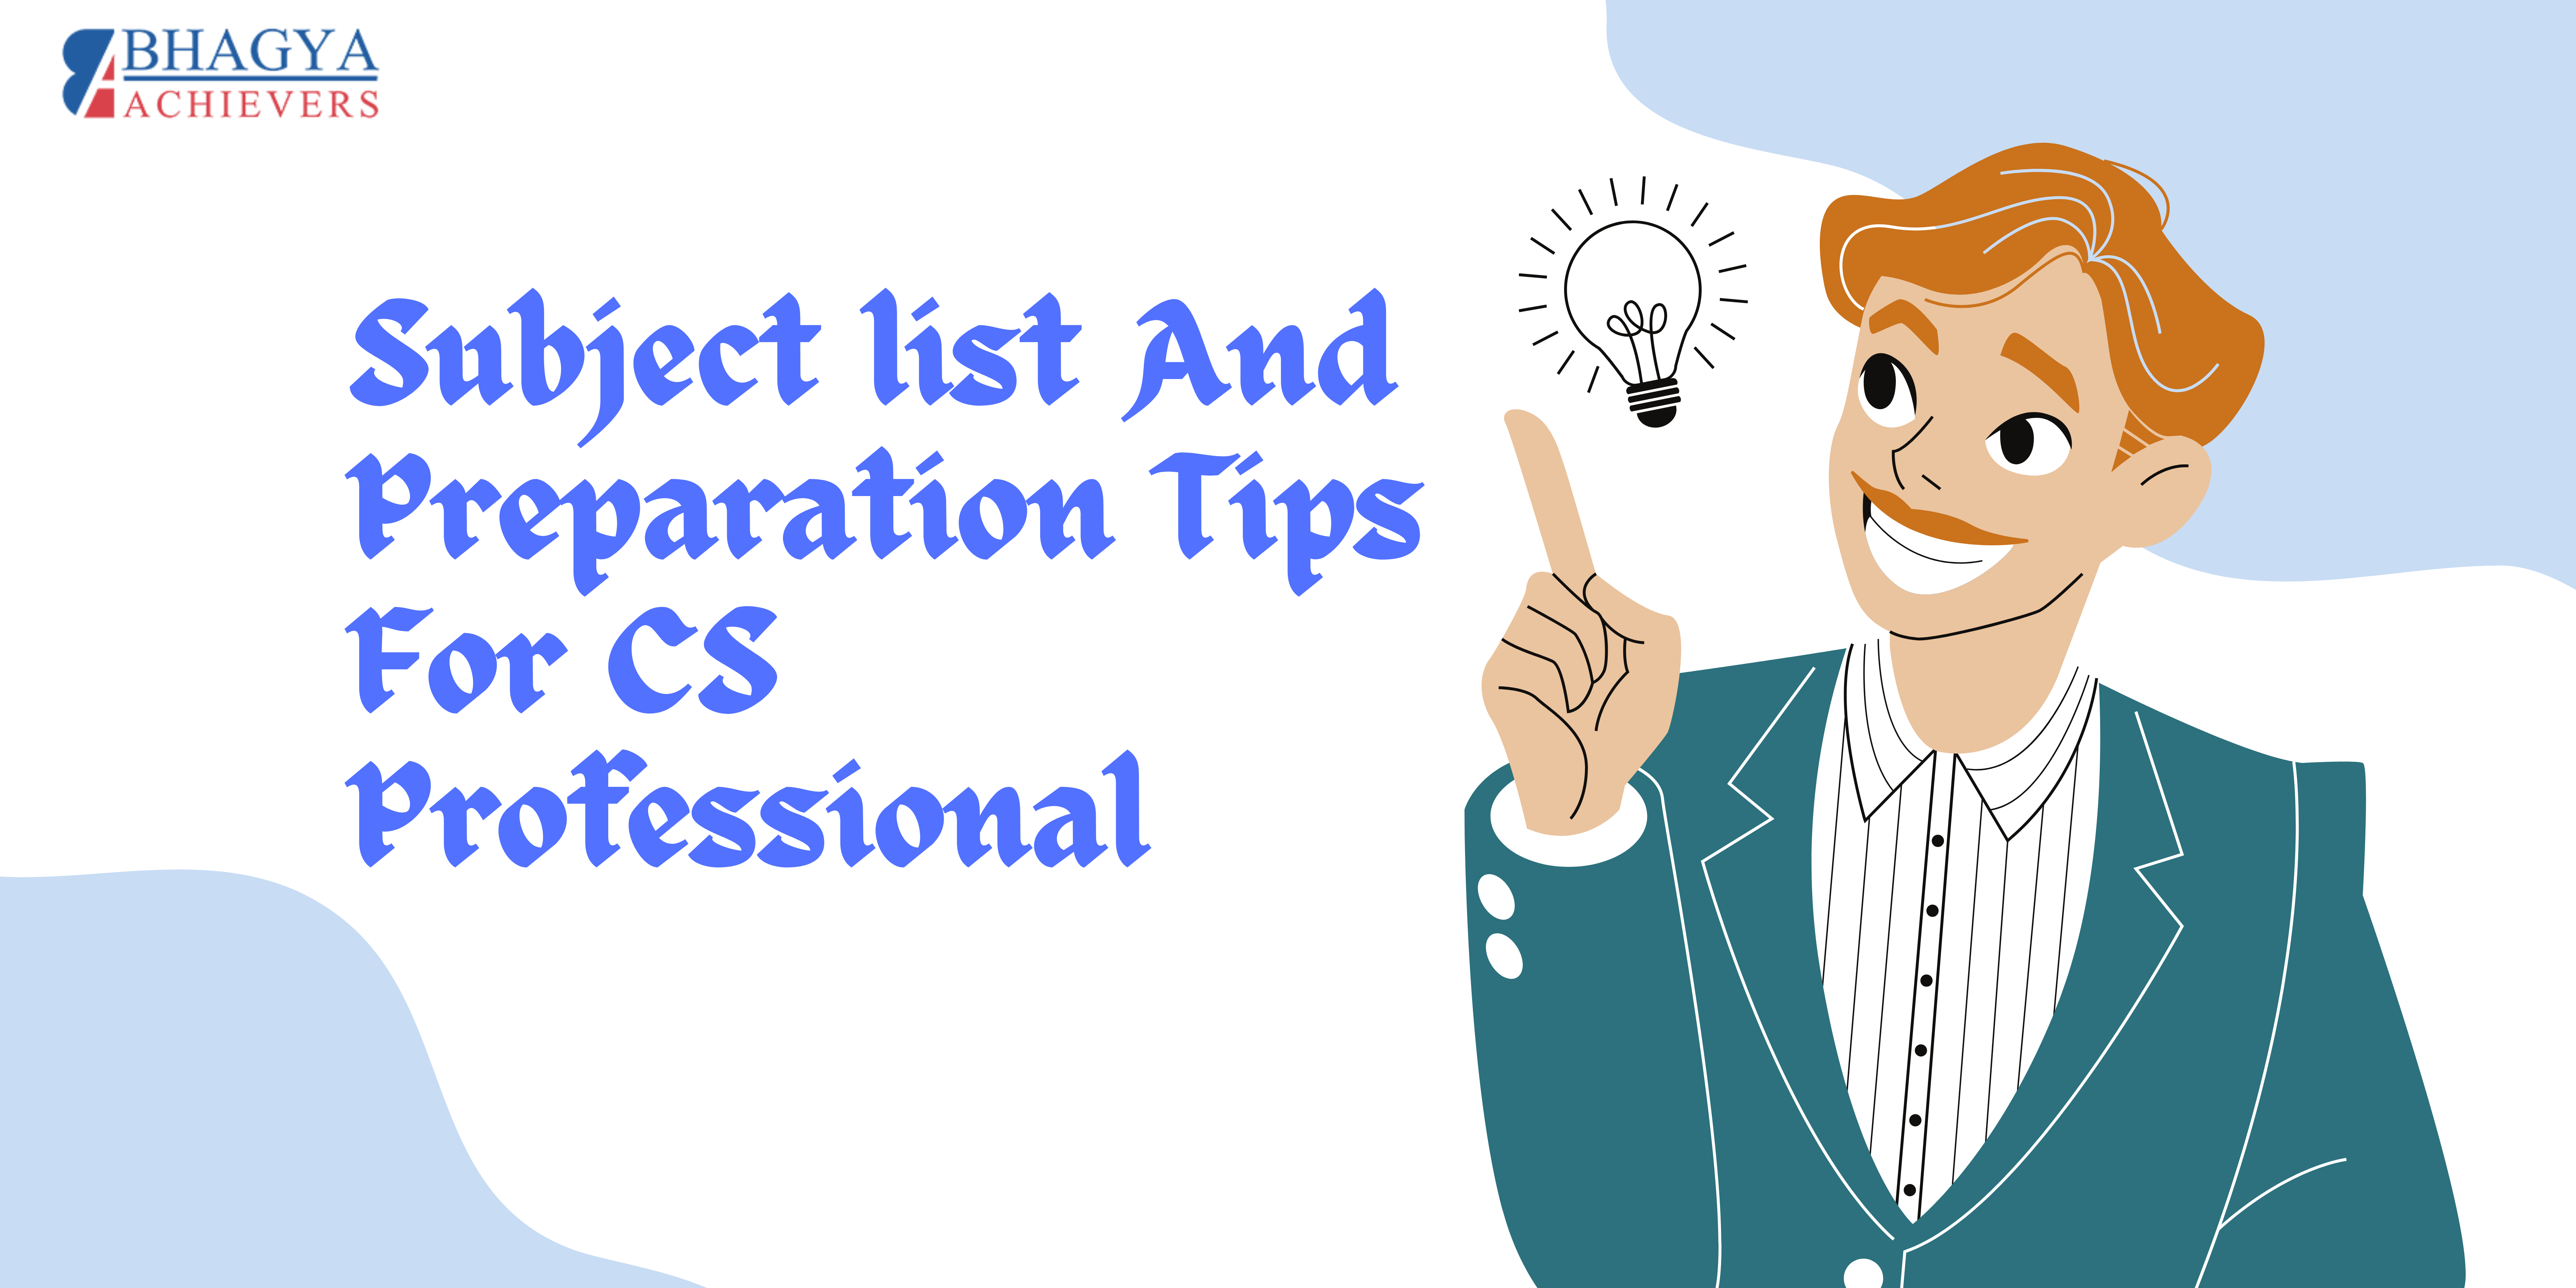 Subject list and preparation tips for CS Professional - Bhagya Achievers